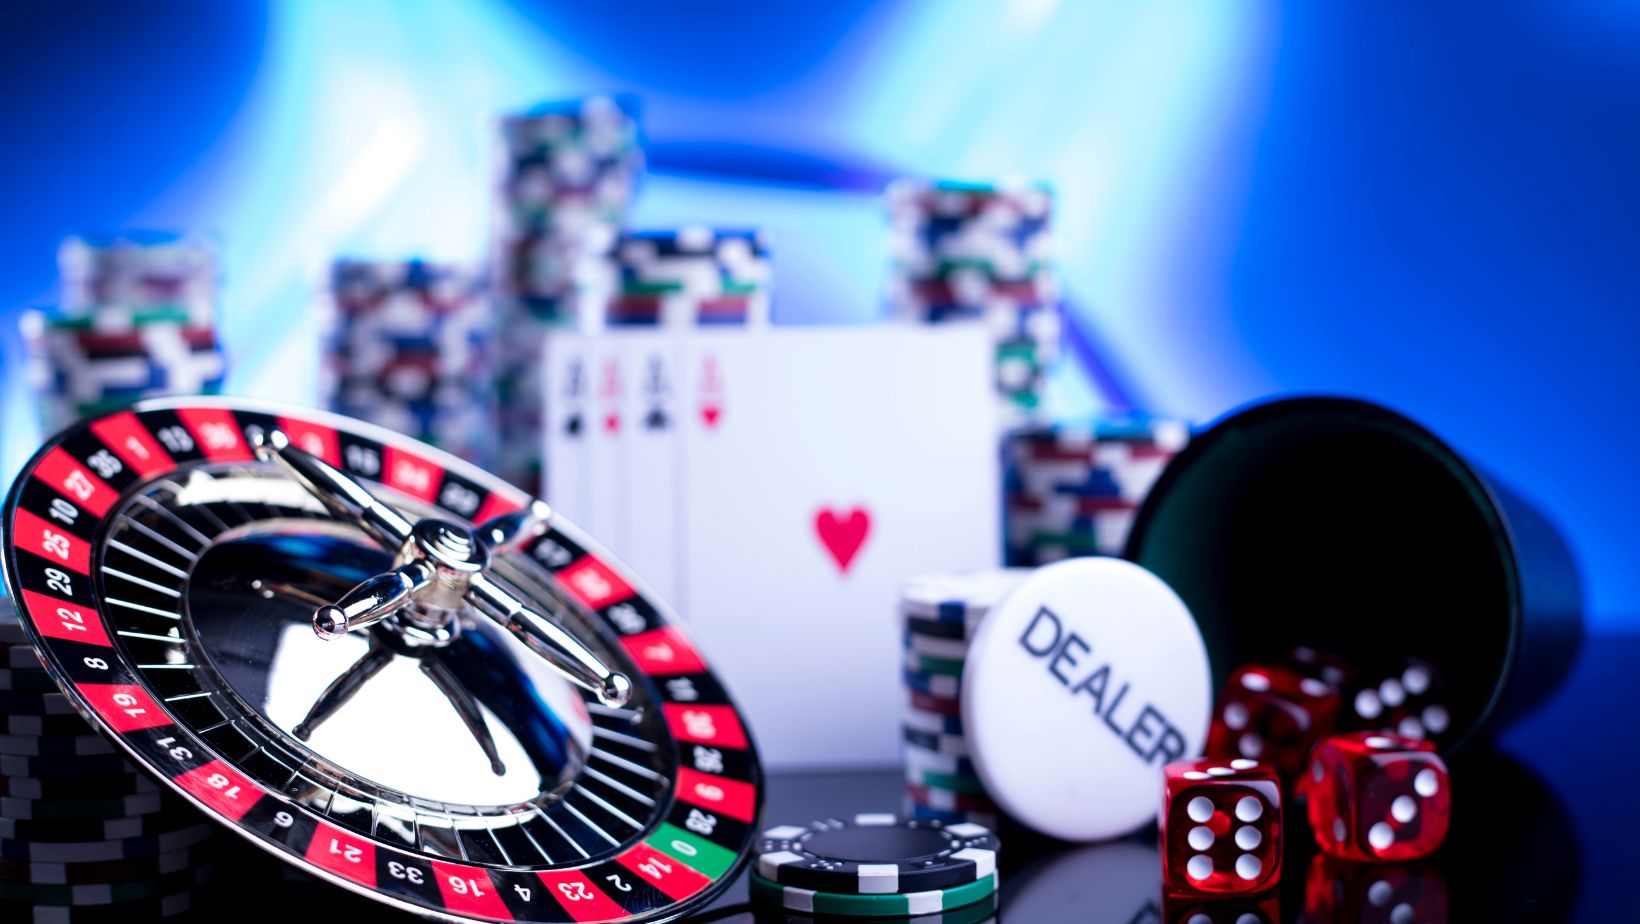 Dive into the Ultimate Online Casino Experience in Canada at SlotsCity!